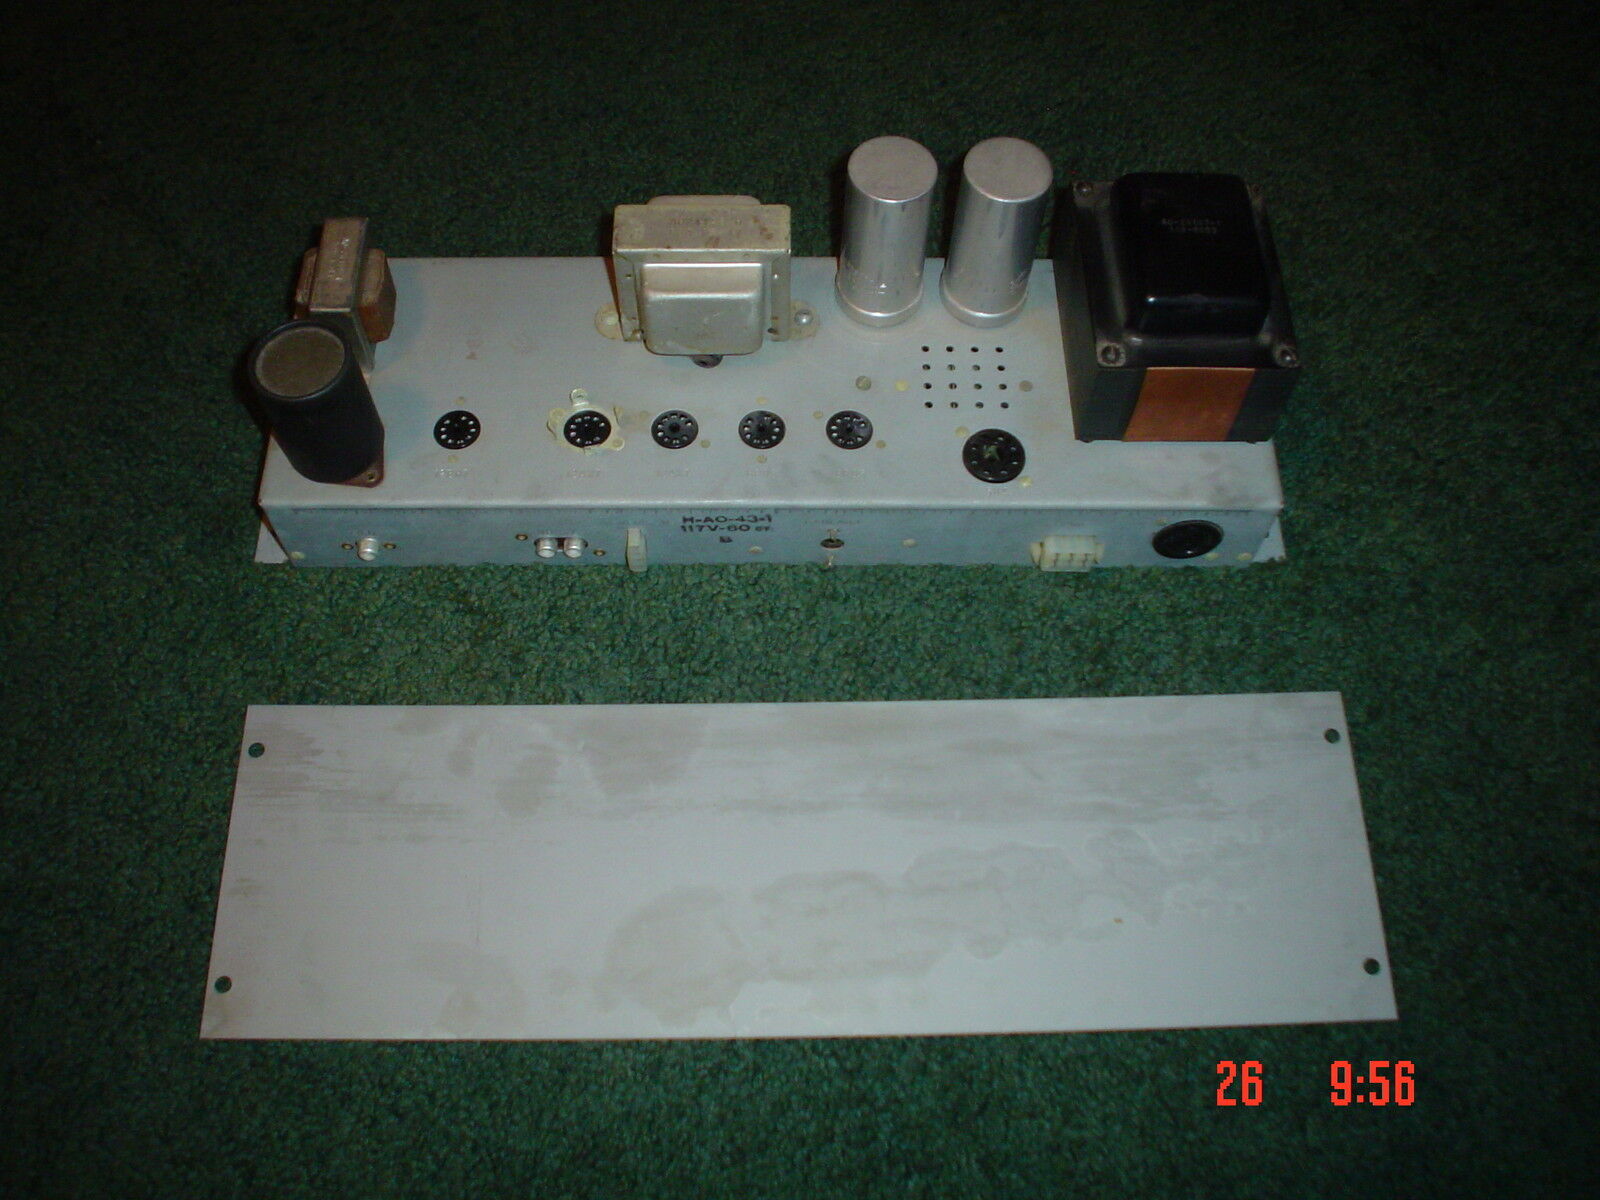 18 watt tube amp chassis guitar amp project can also use 6v6gt if desired TONE